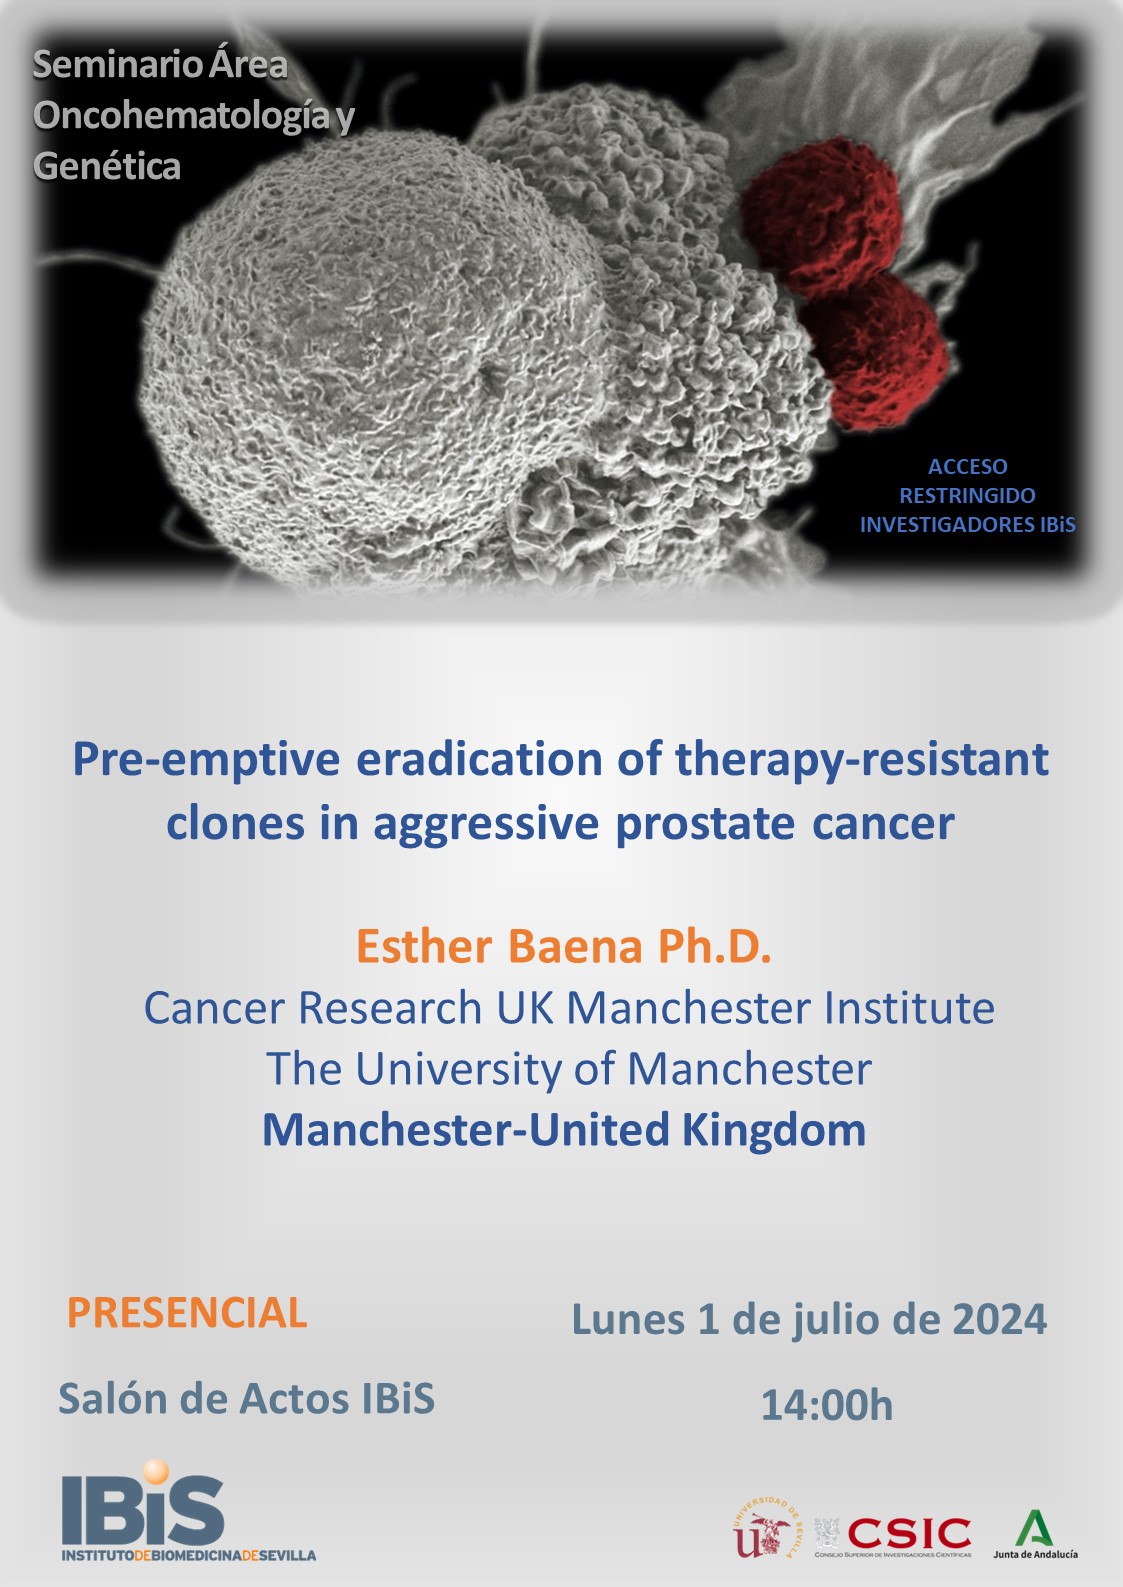 Poster: Pre-emptive eradication of therapy-resistant clones in aggressive prostate cancer